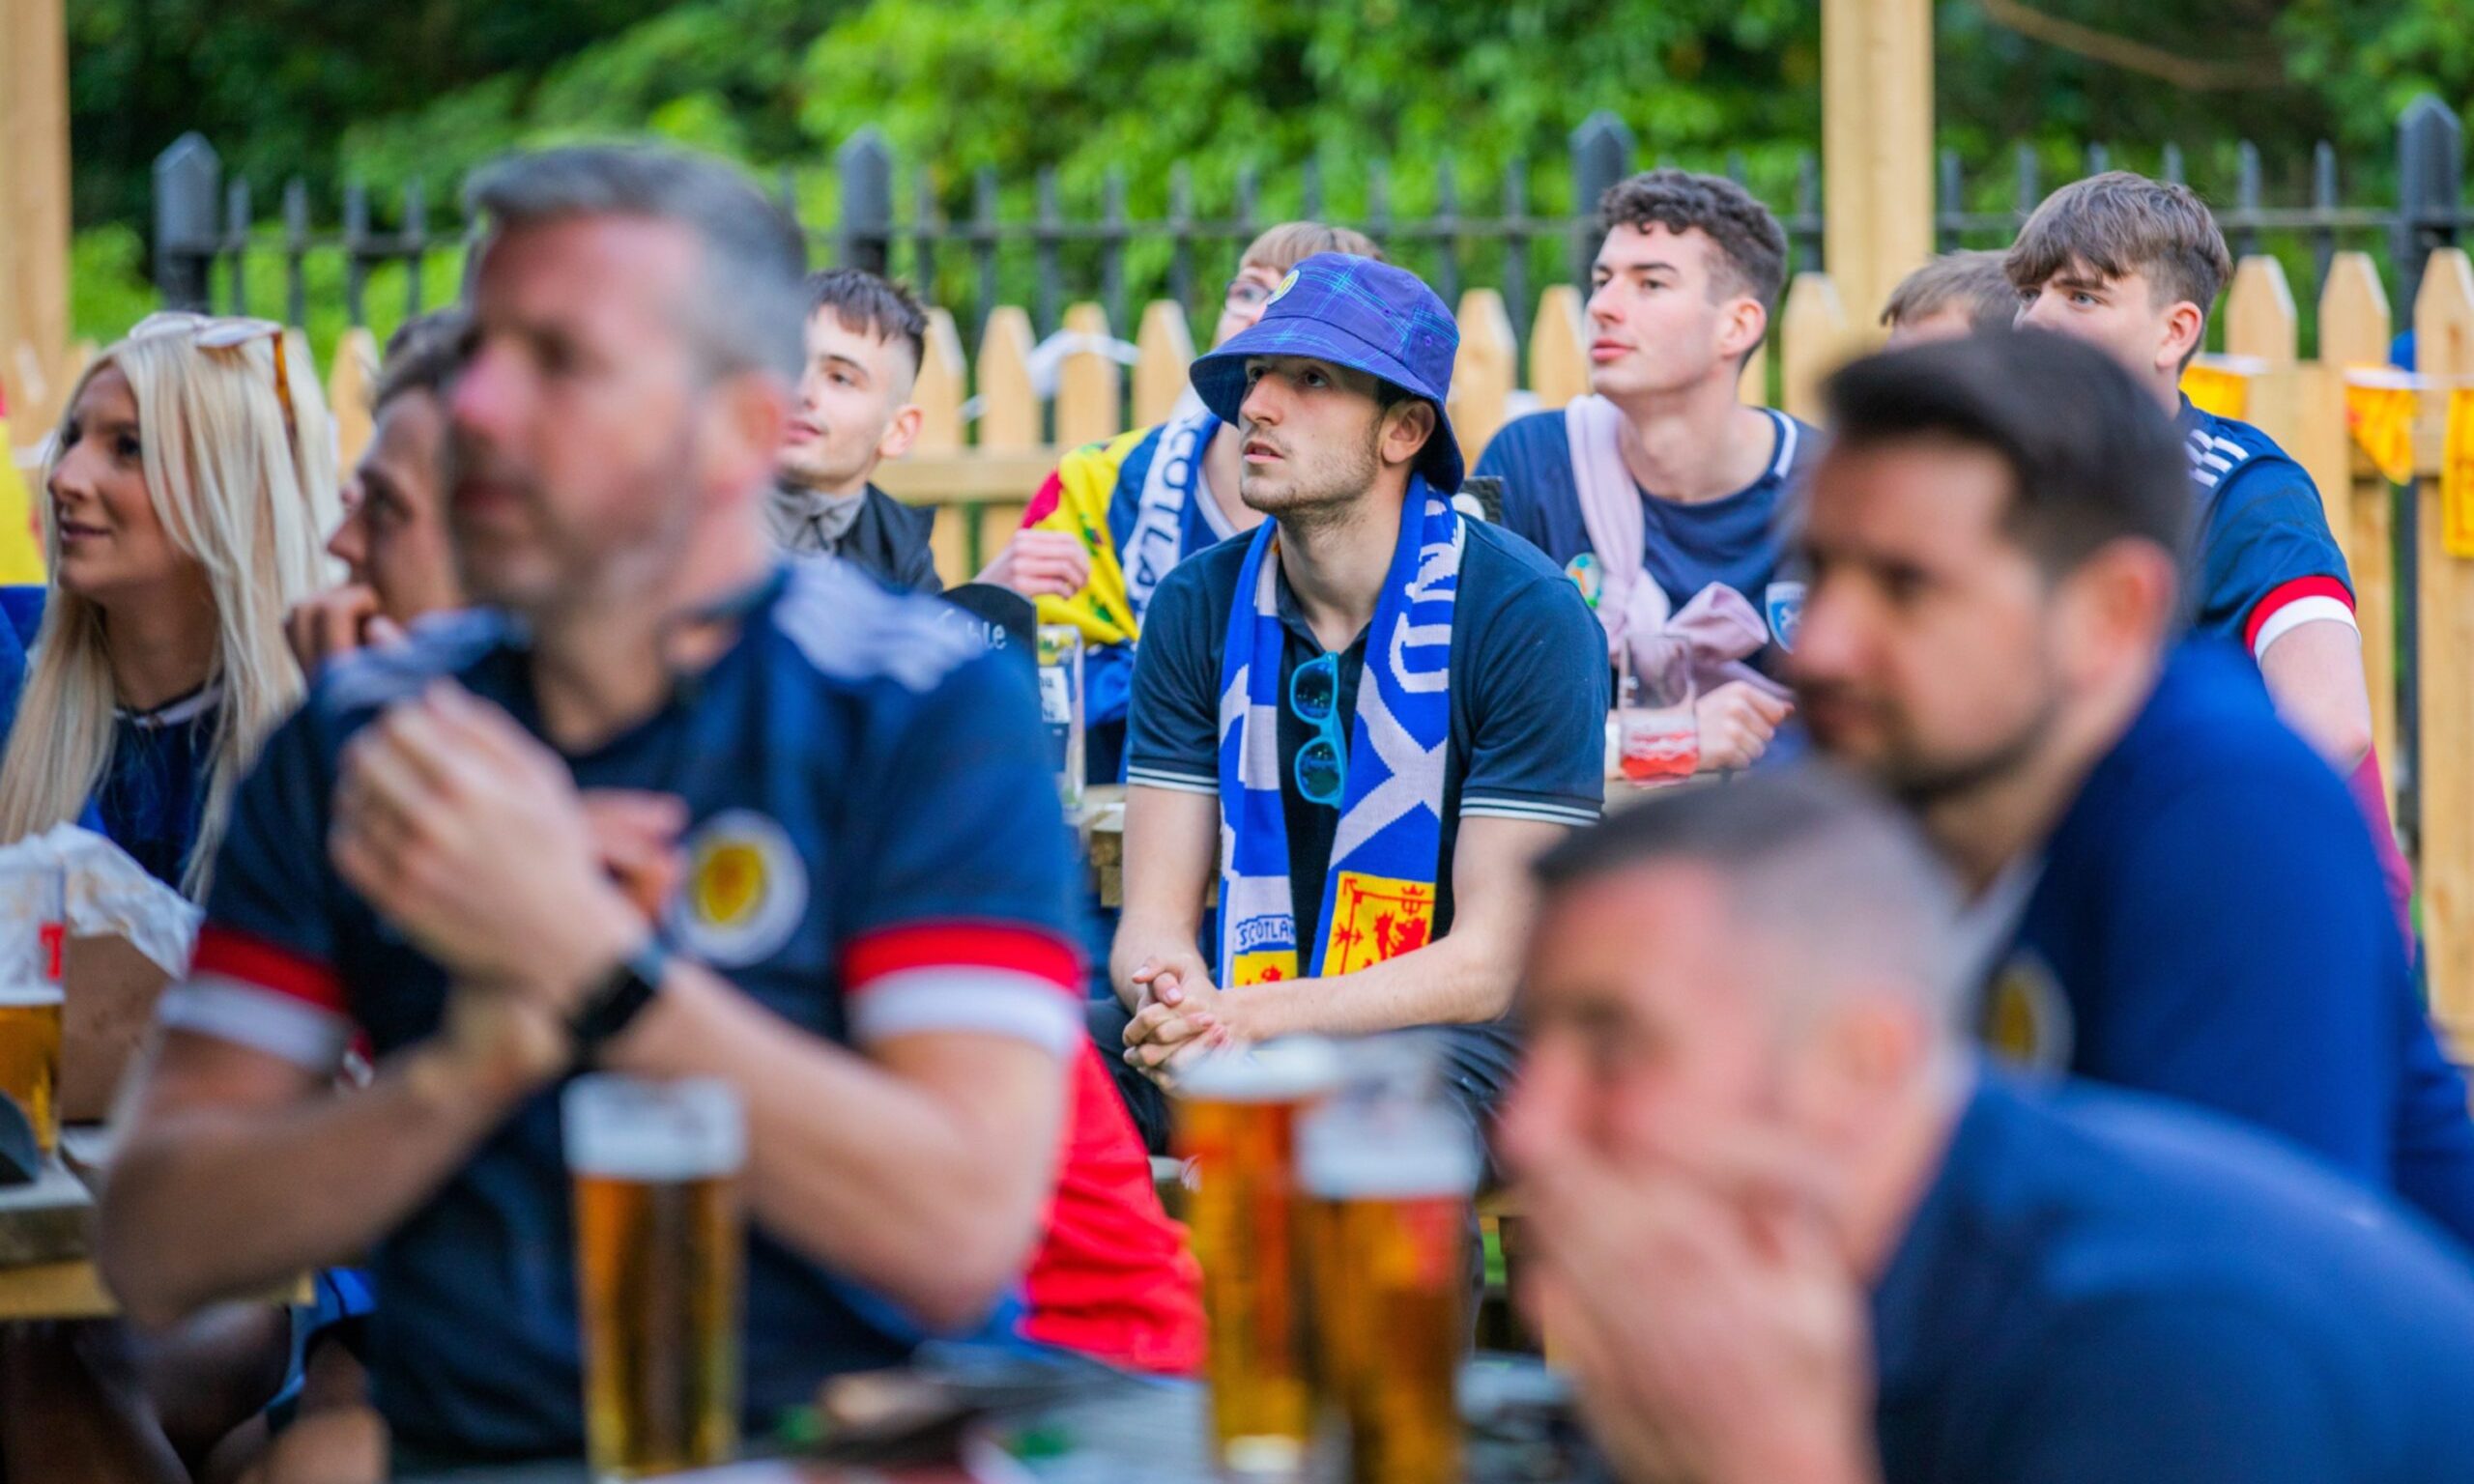 Scotland fans watching Euro 2020 at the Cherrybank Inn in Perth.